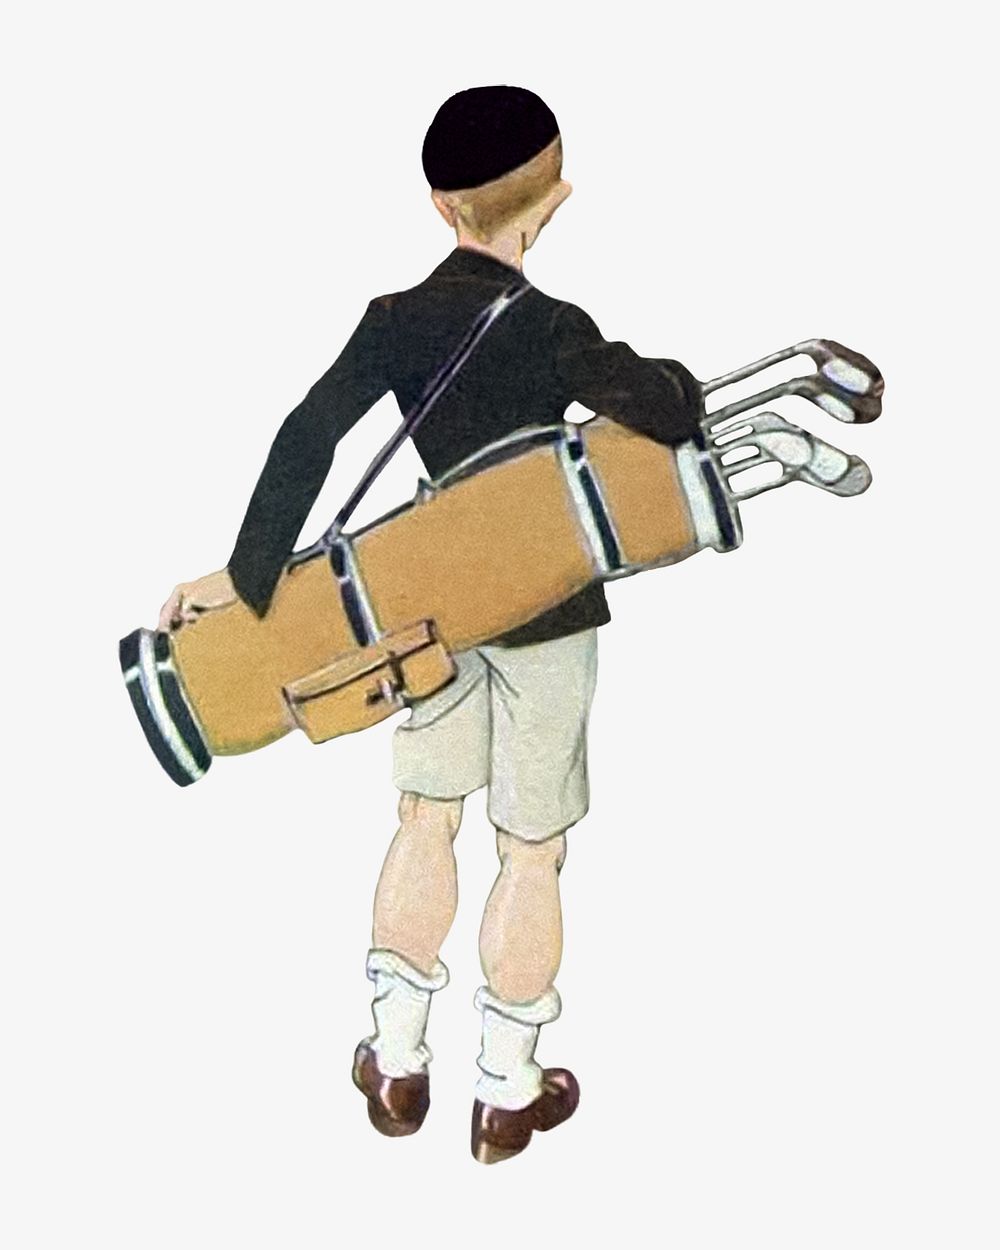 Vintage golf caddy, chromolithograph illustration. Remixed by rawpixel. 